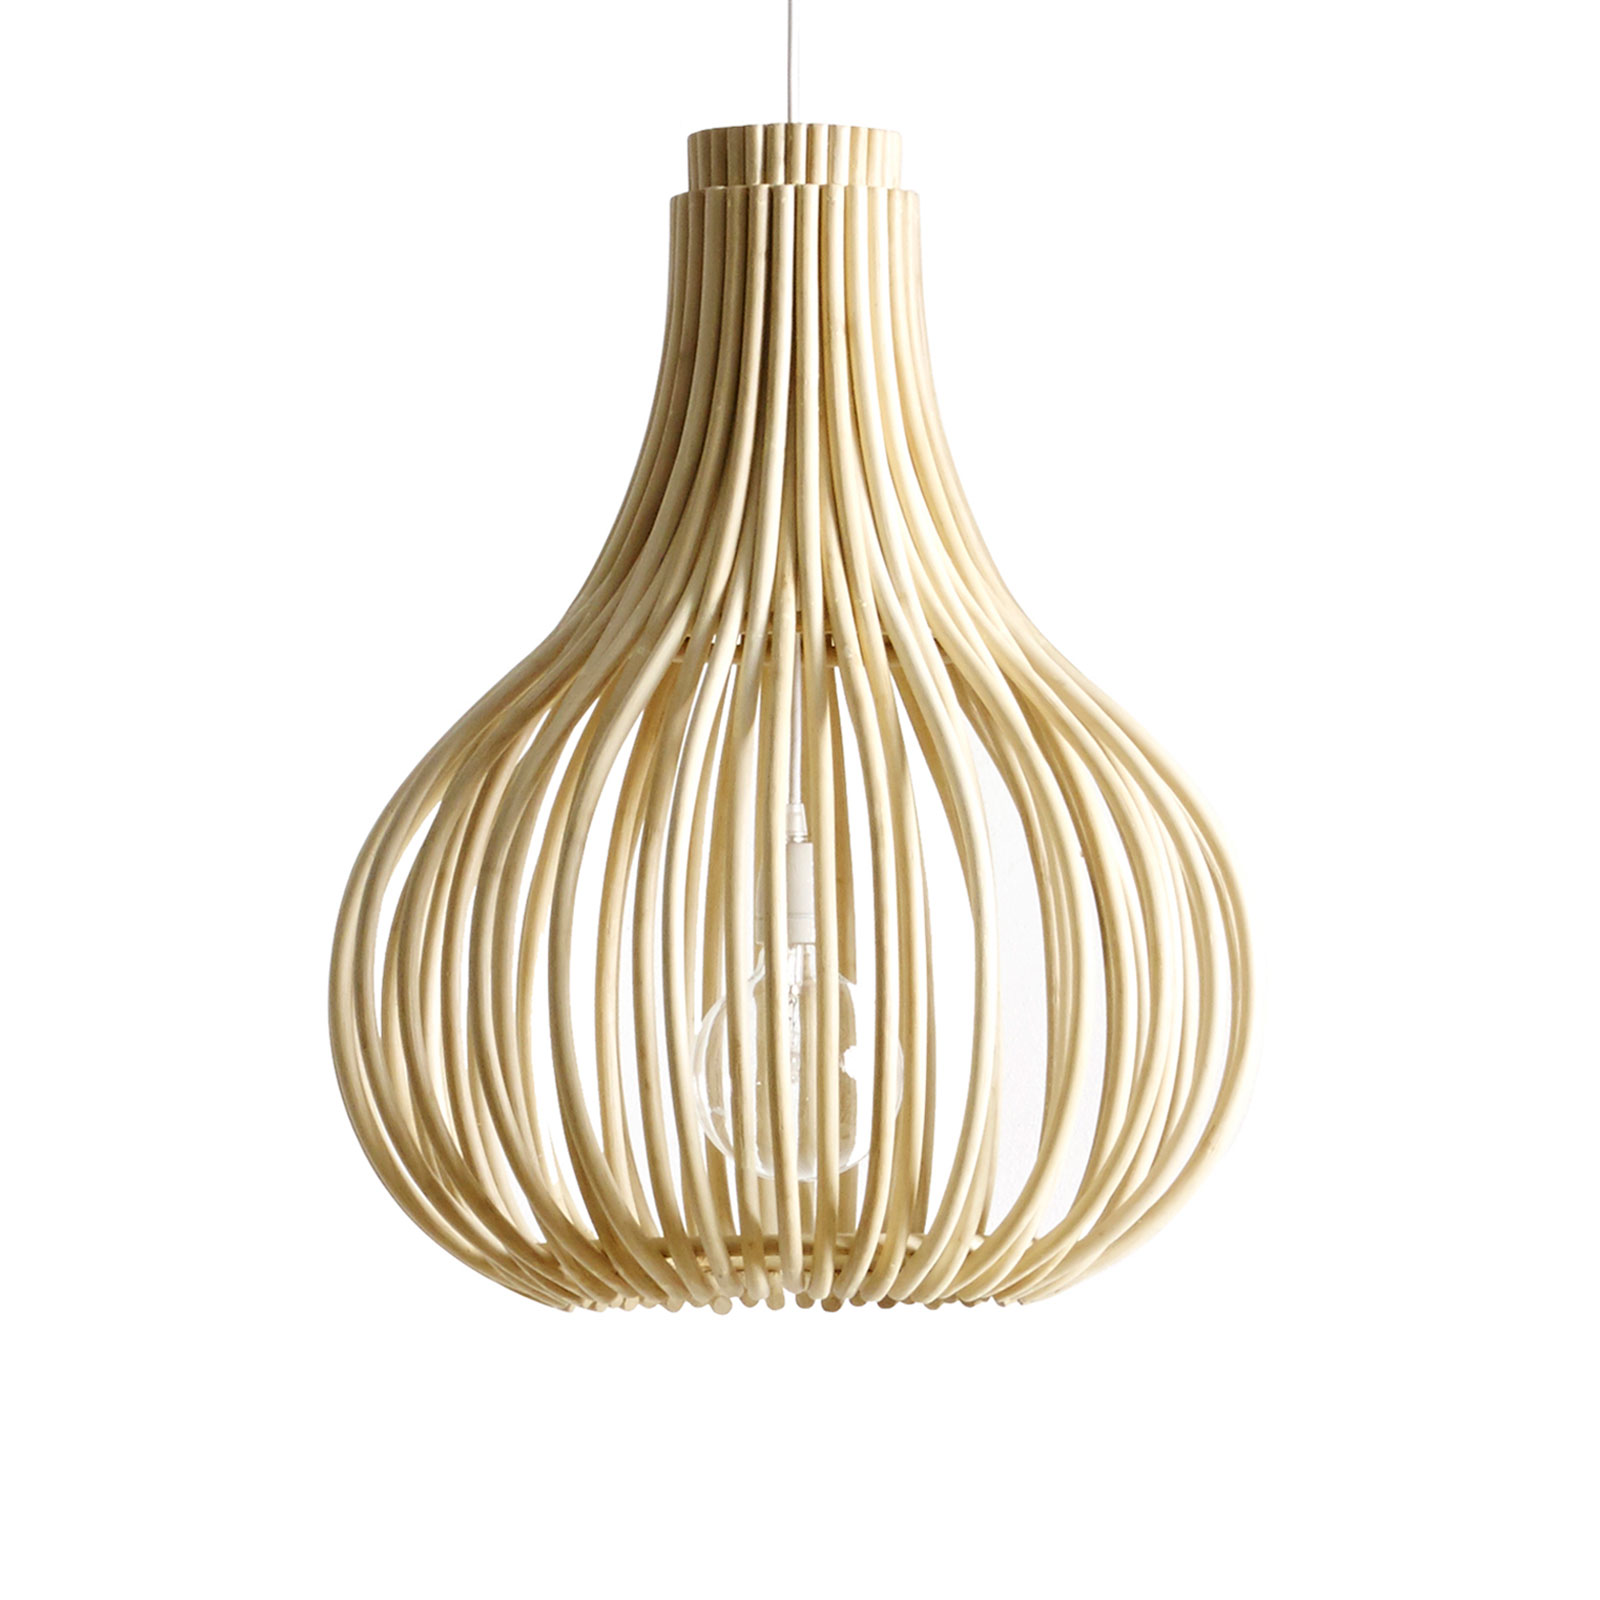 Rattan Lamp by Vincent Sheppard